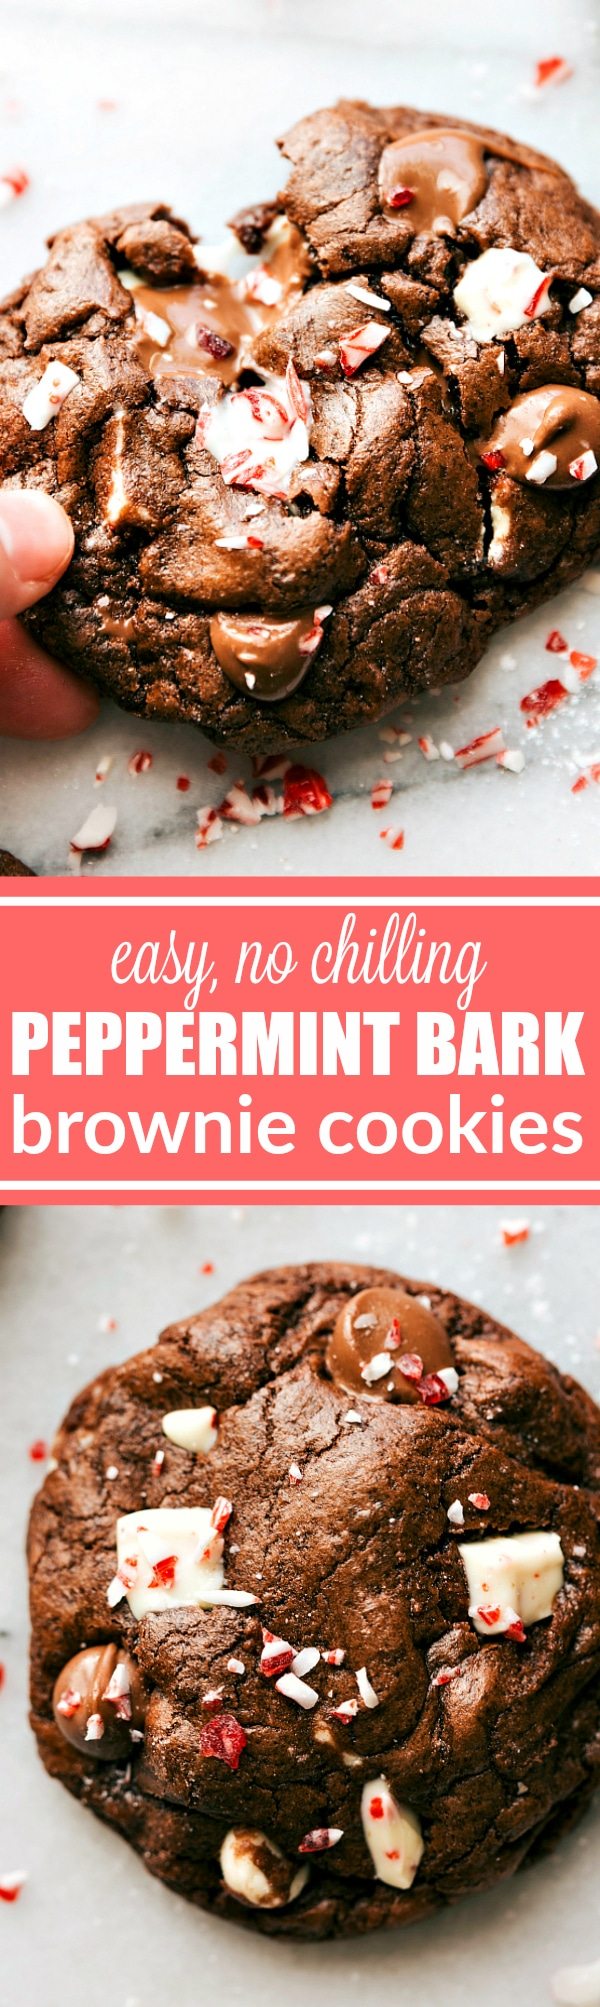 PEPPERMINT BARK BROWNIE COOKIES! Easy to make brownie cookies with chunks of peppermint bark and a sprinkle of crushed peppermint. These cookies are ultra fudgy AND easy to make! via chelseasmessyapron.com